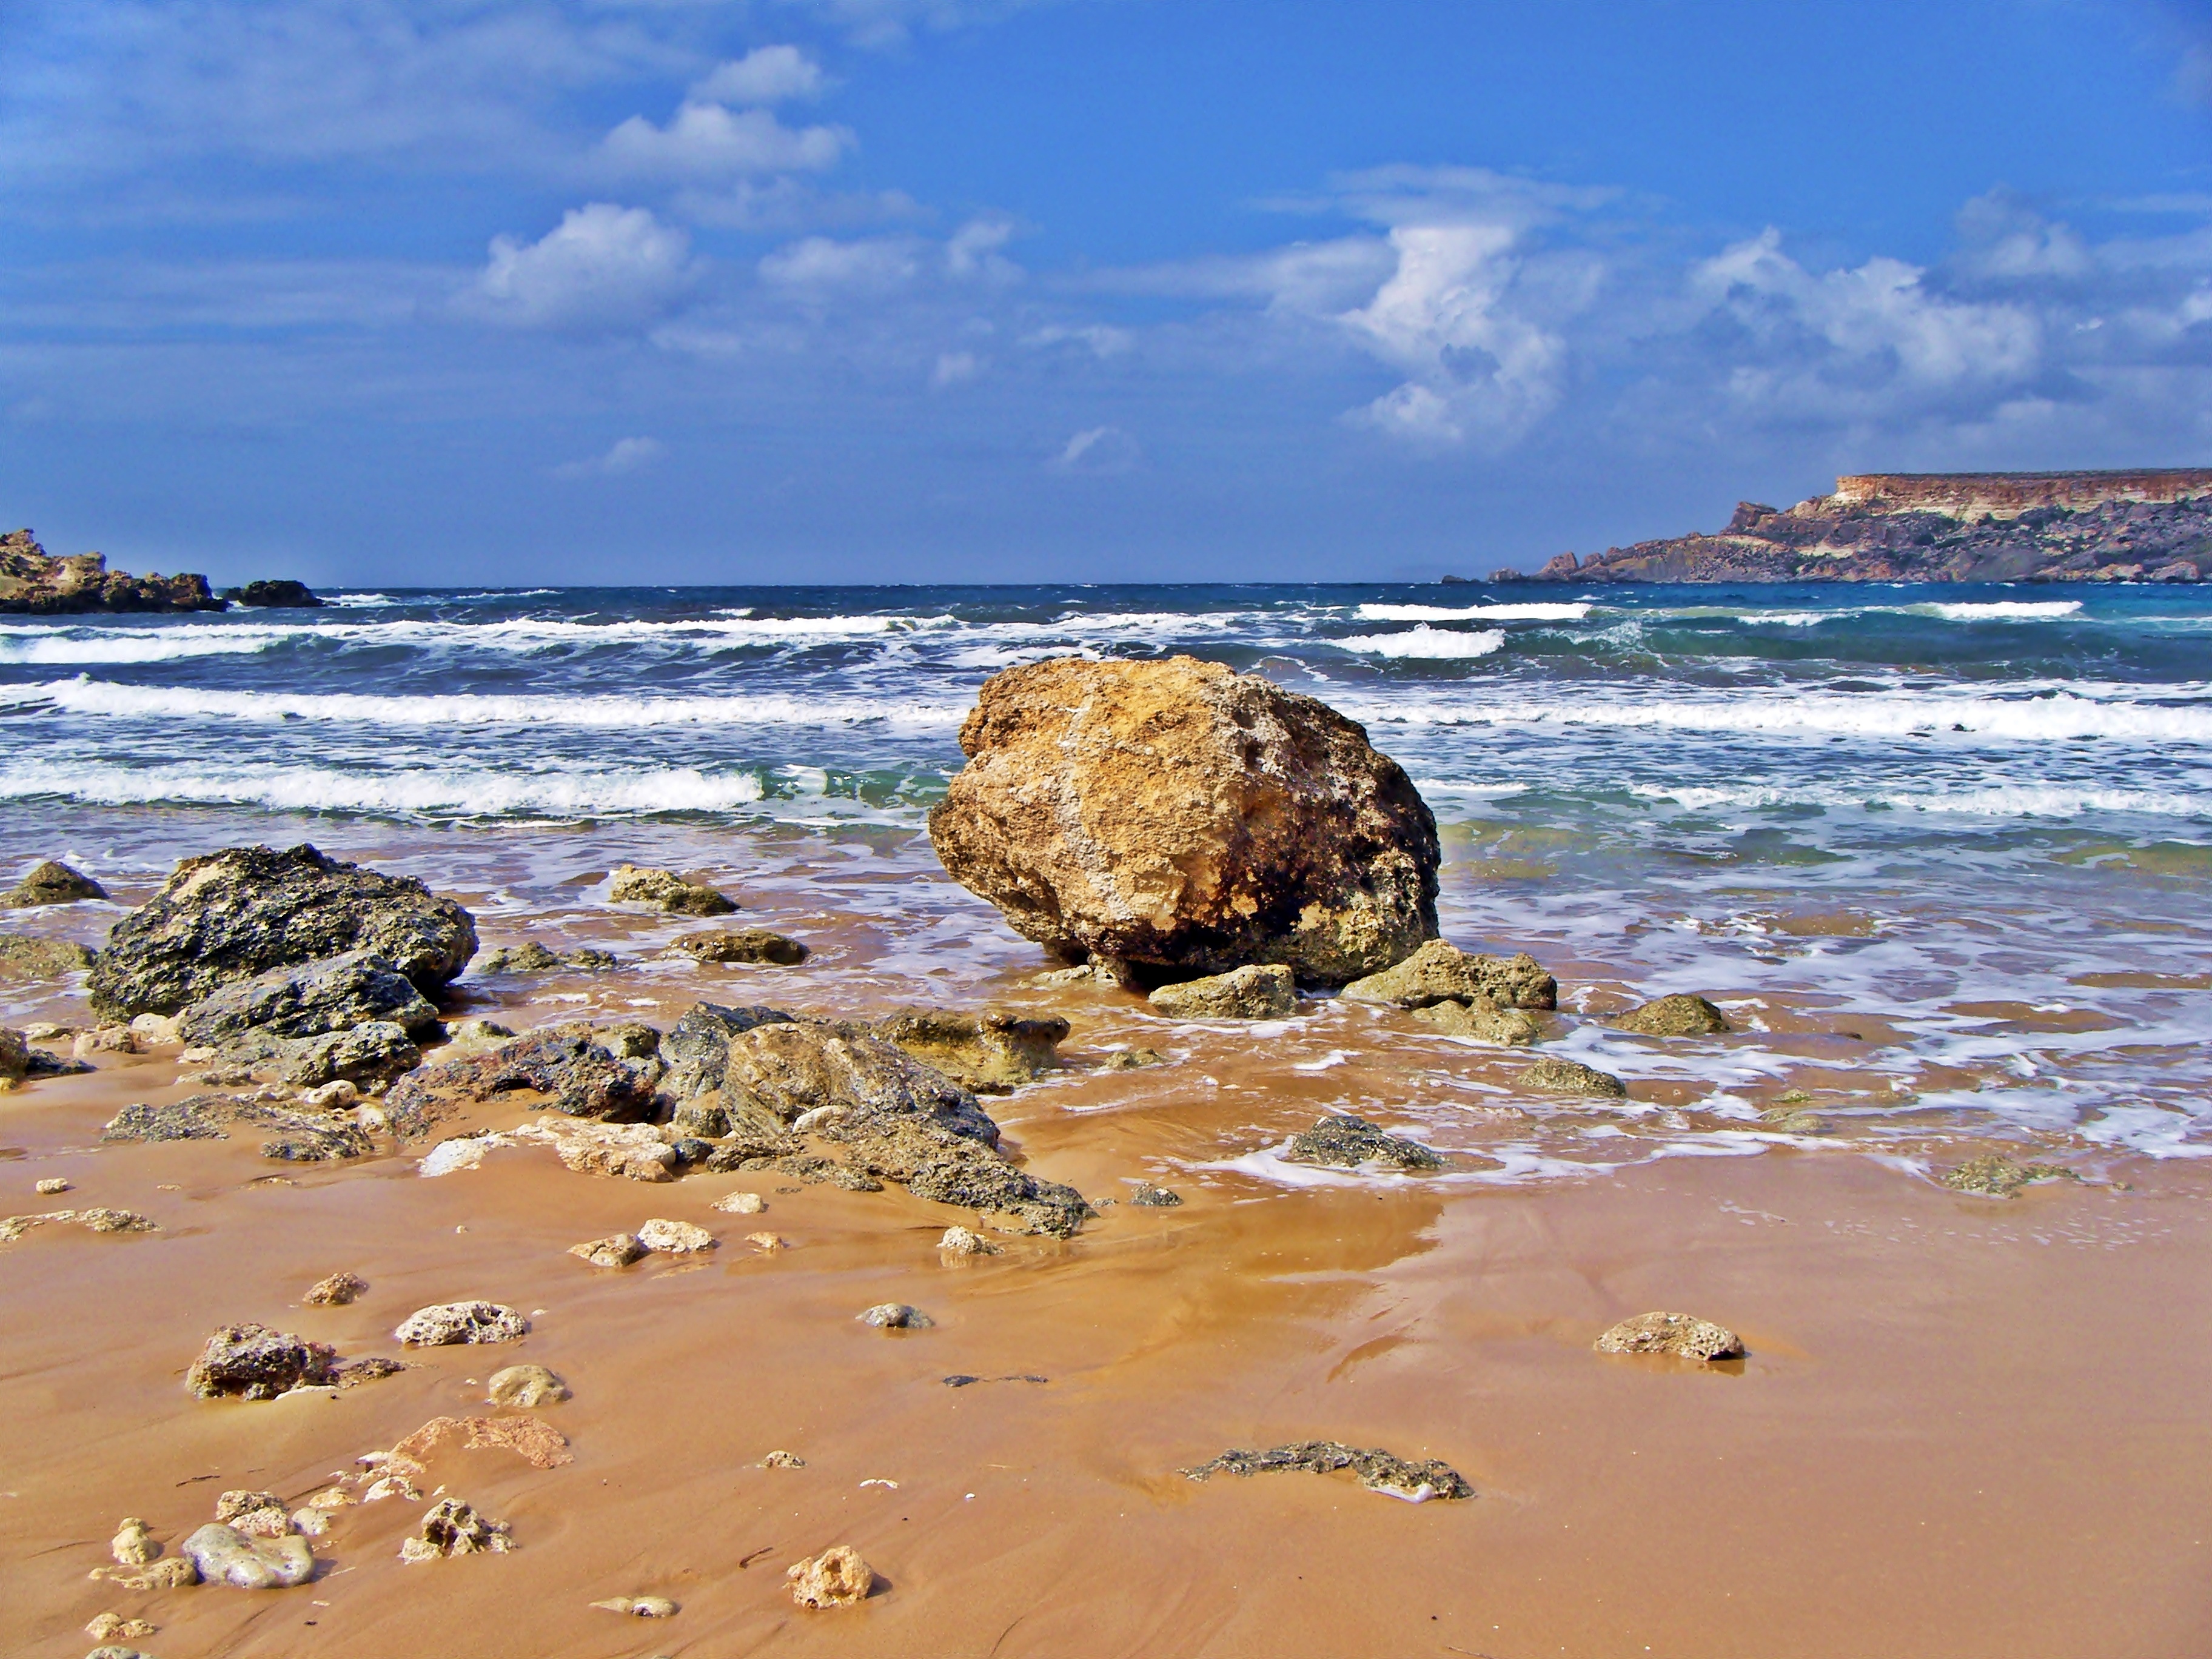 Free Images - beach background ocean sand